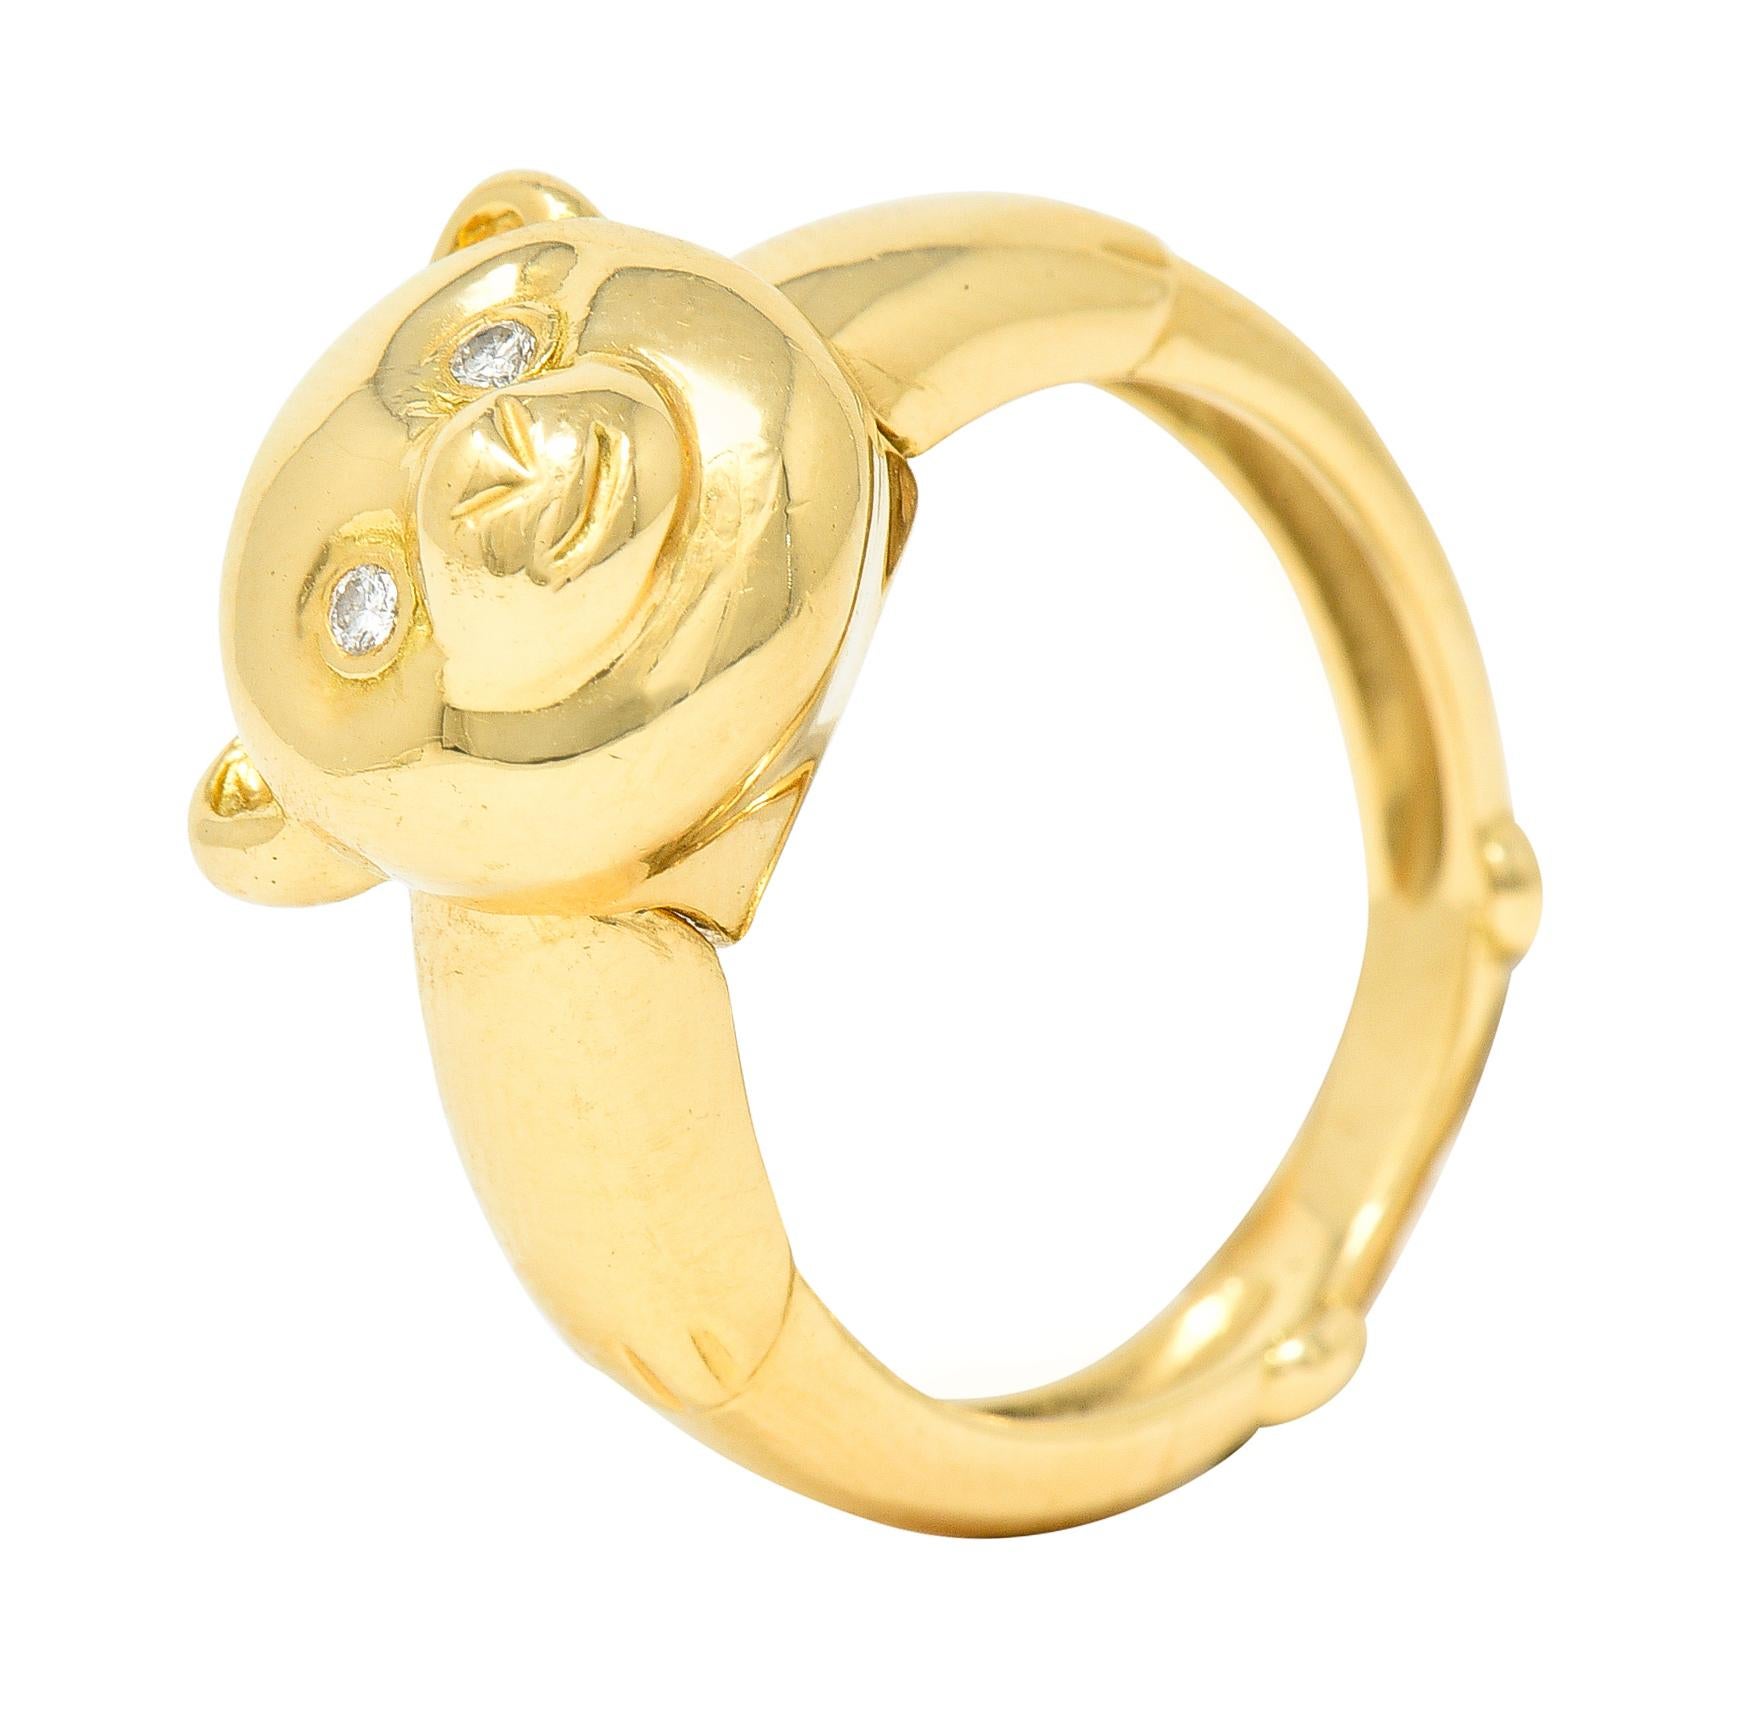 Gold band ring has paws subtly designed into shank. While head is dimensionally rendered and pivots forward to reveal concealed bale. Converting band ring into a stylized and circular teddy bear pendant. Eyes are two round brilliant cut diamonds